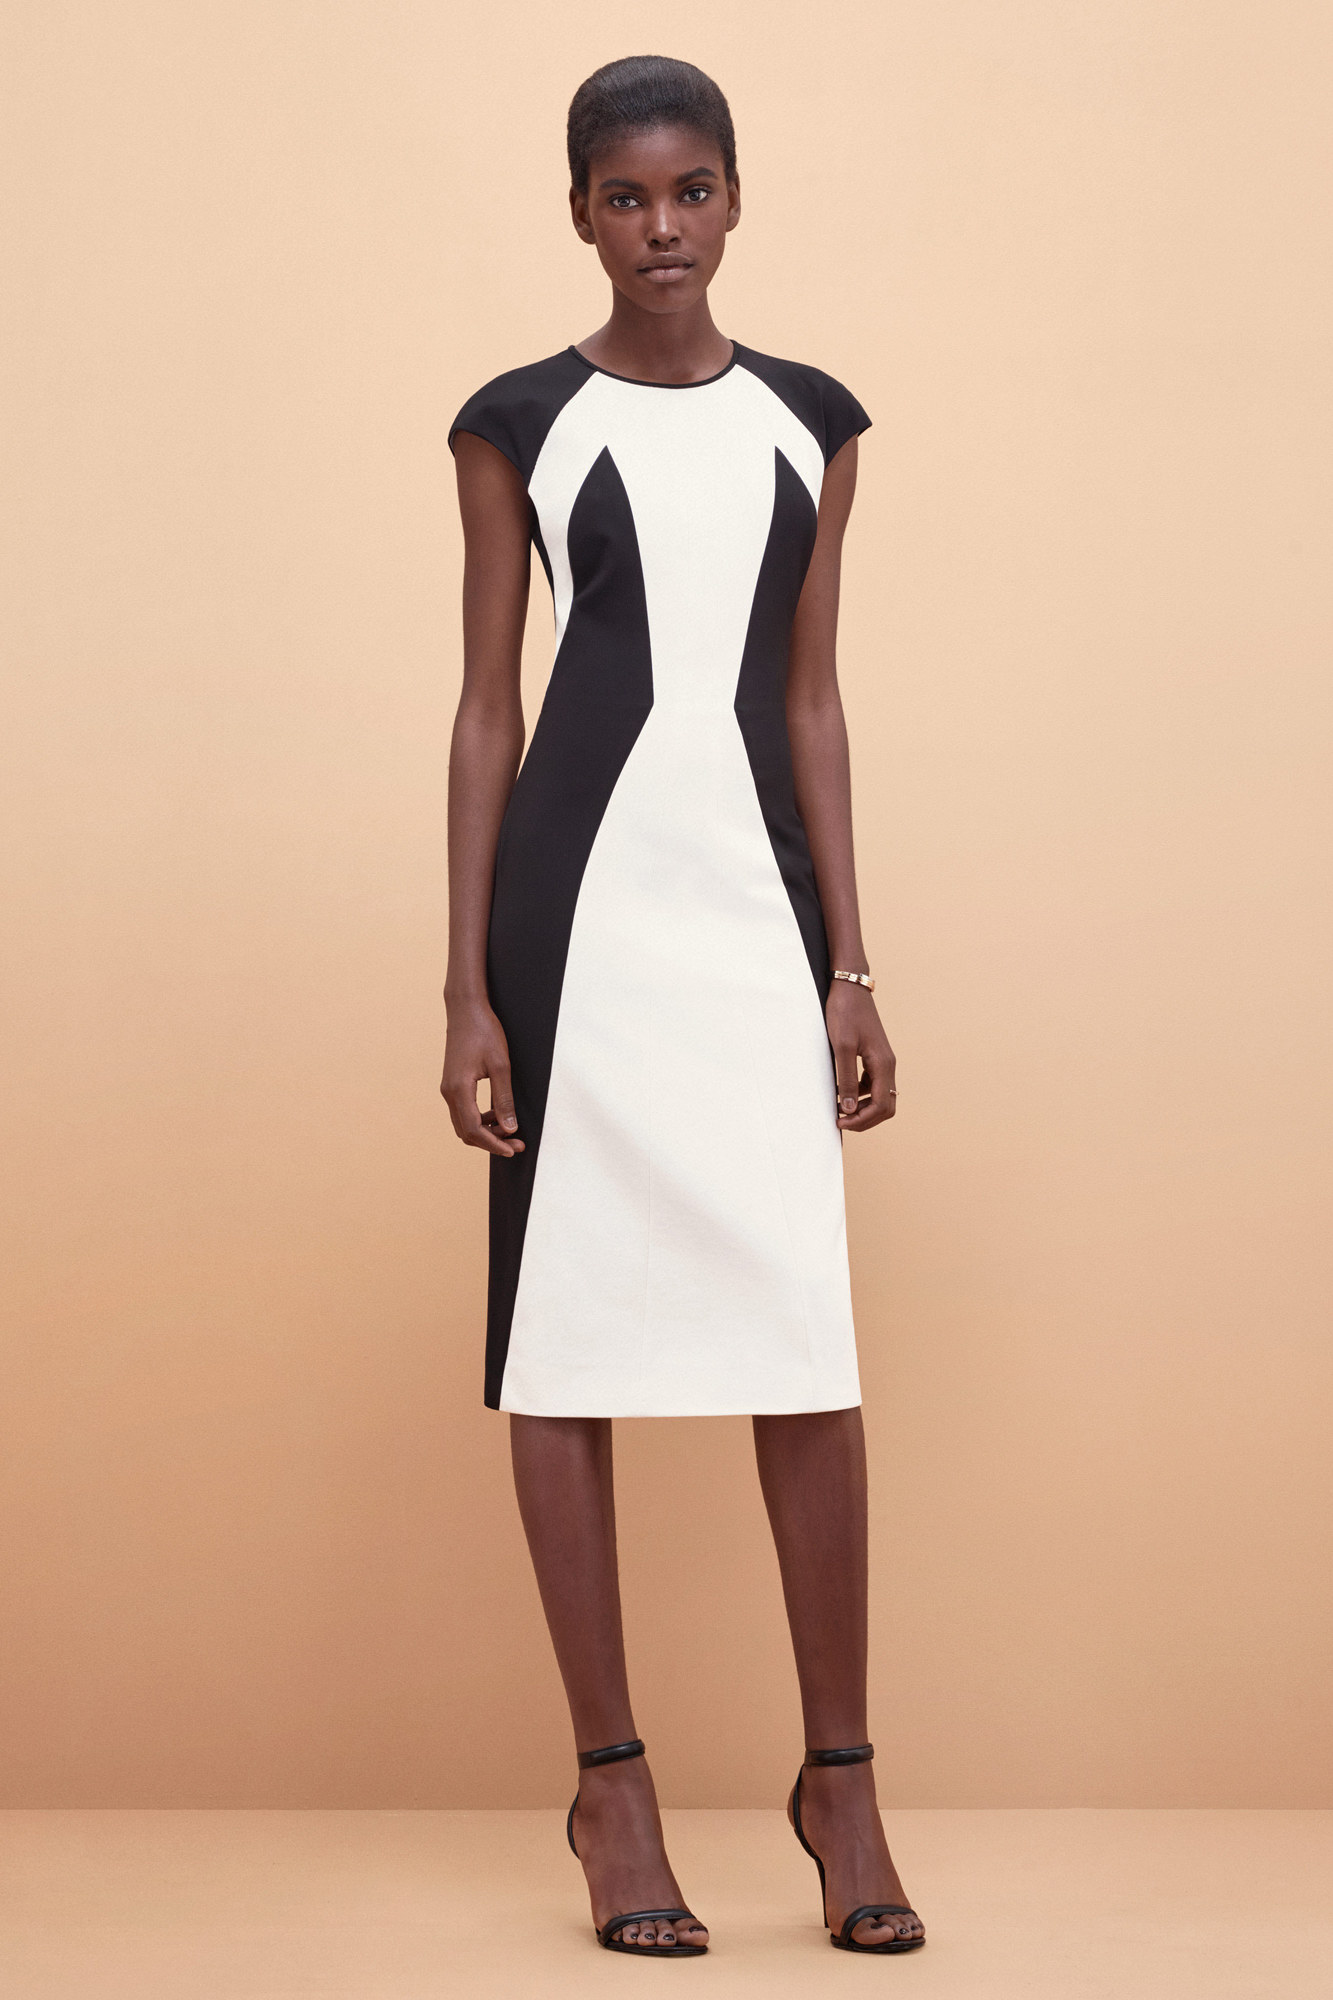 Show Review: KLS Kimora Lee Simmons Ready to Wear Spring 2016